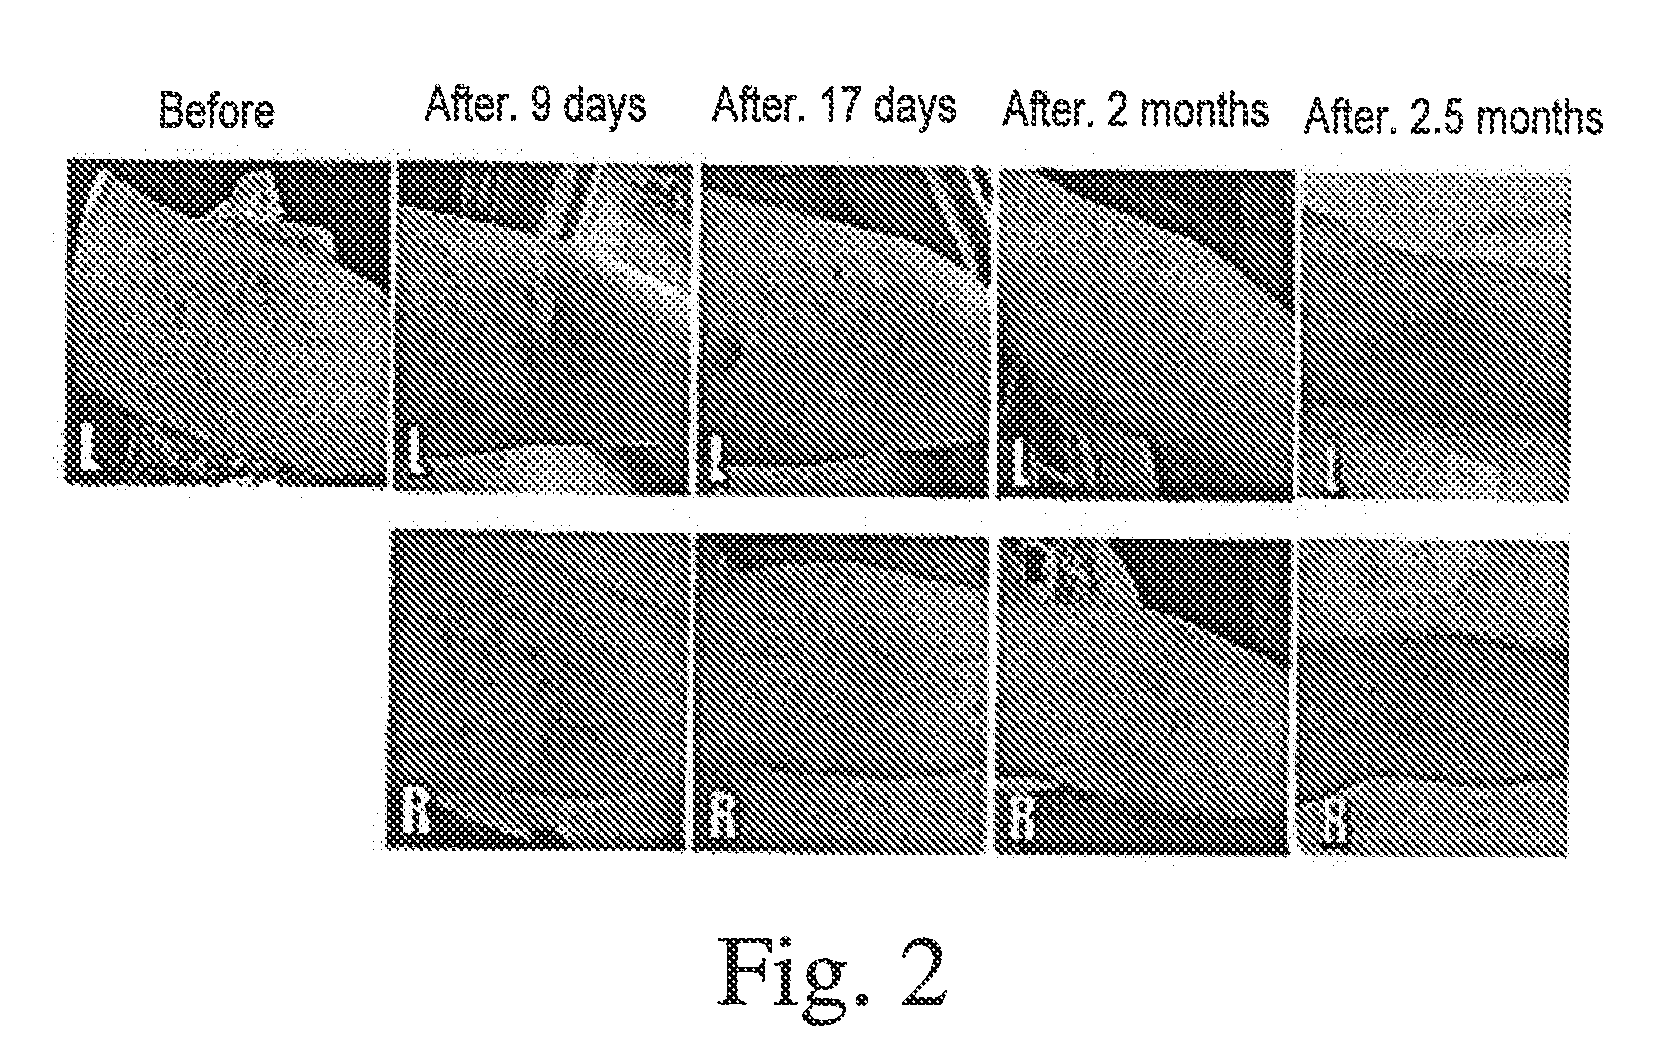 Methods of treating diseases or conditions using mesenchymal stem cells